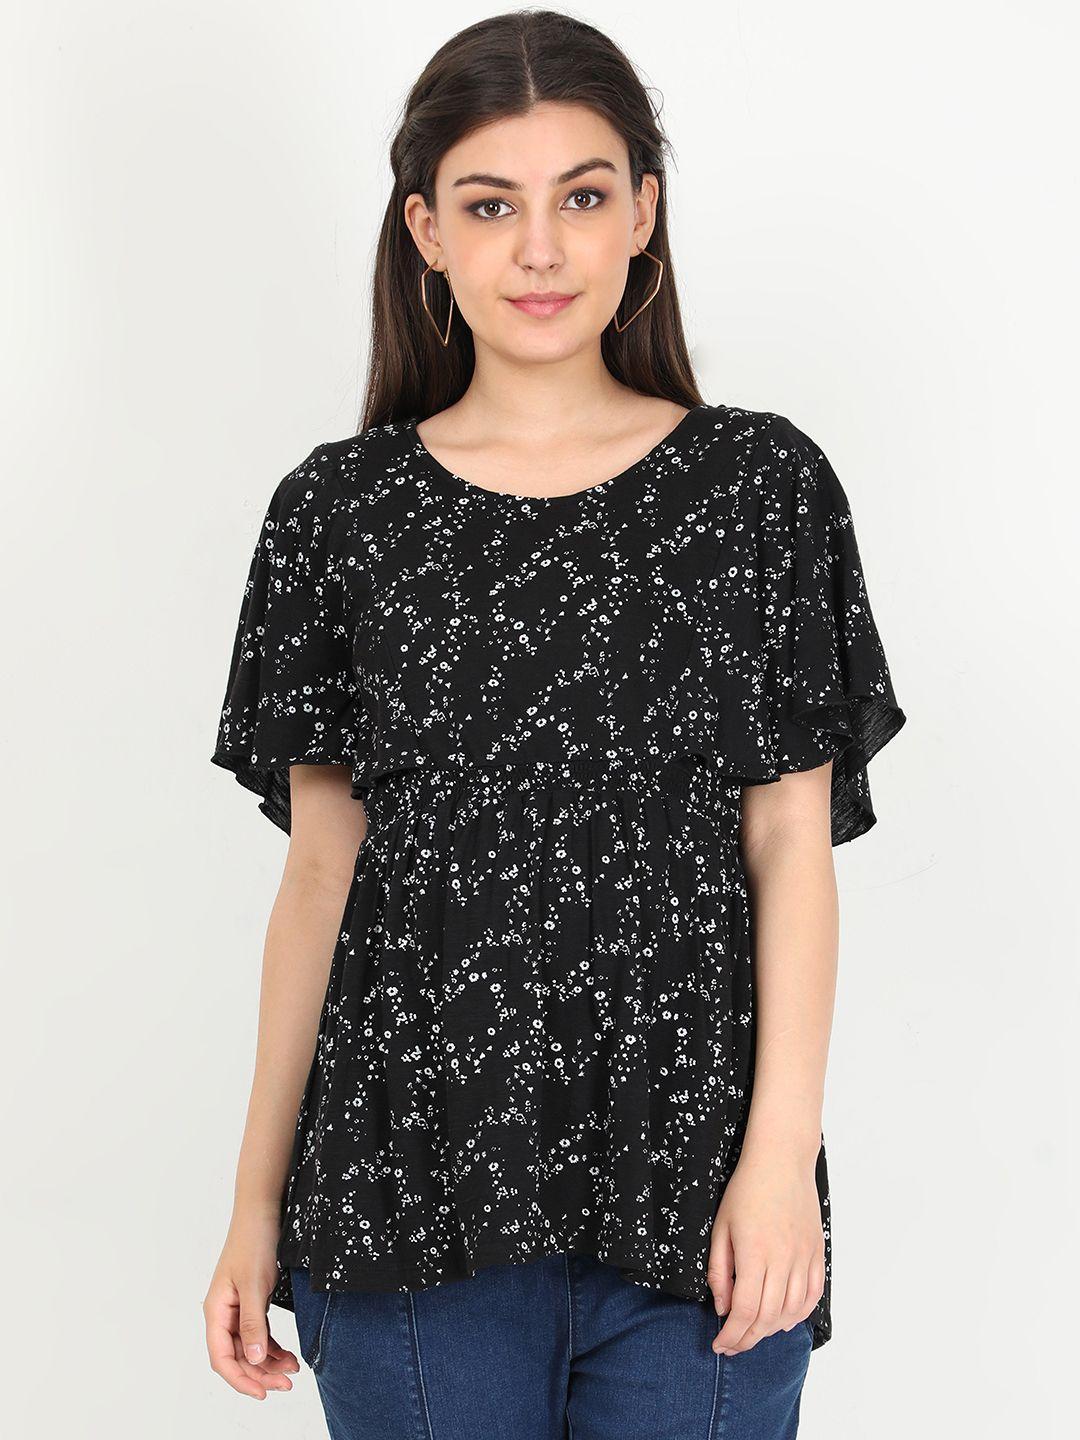 the mom store black floral maternity and nursing top